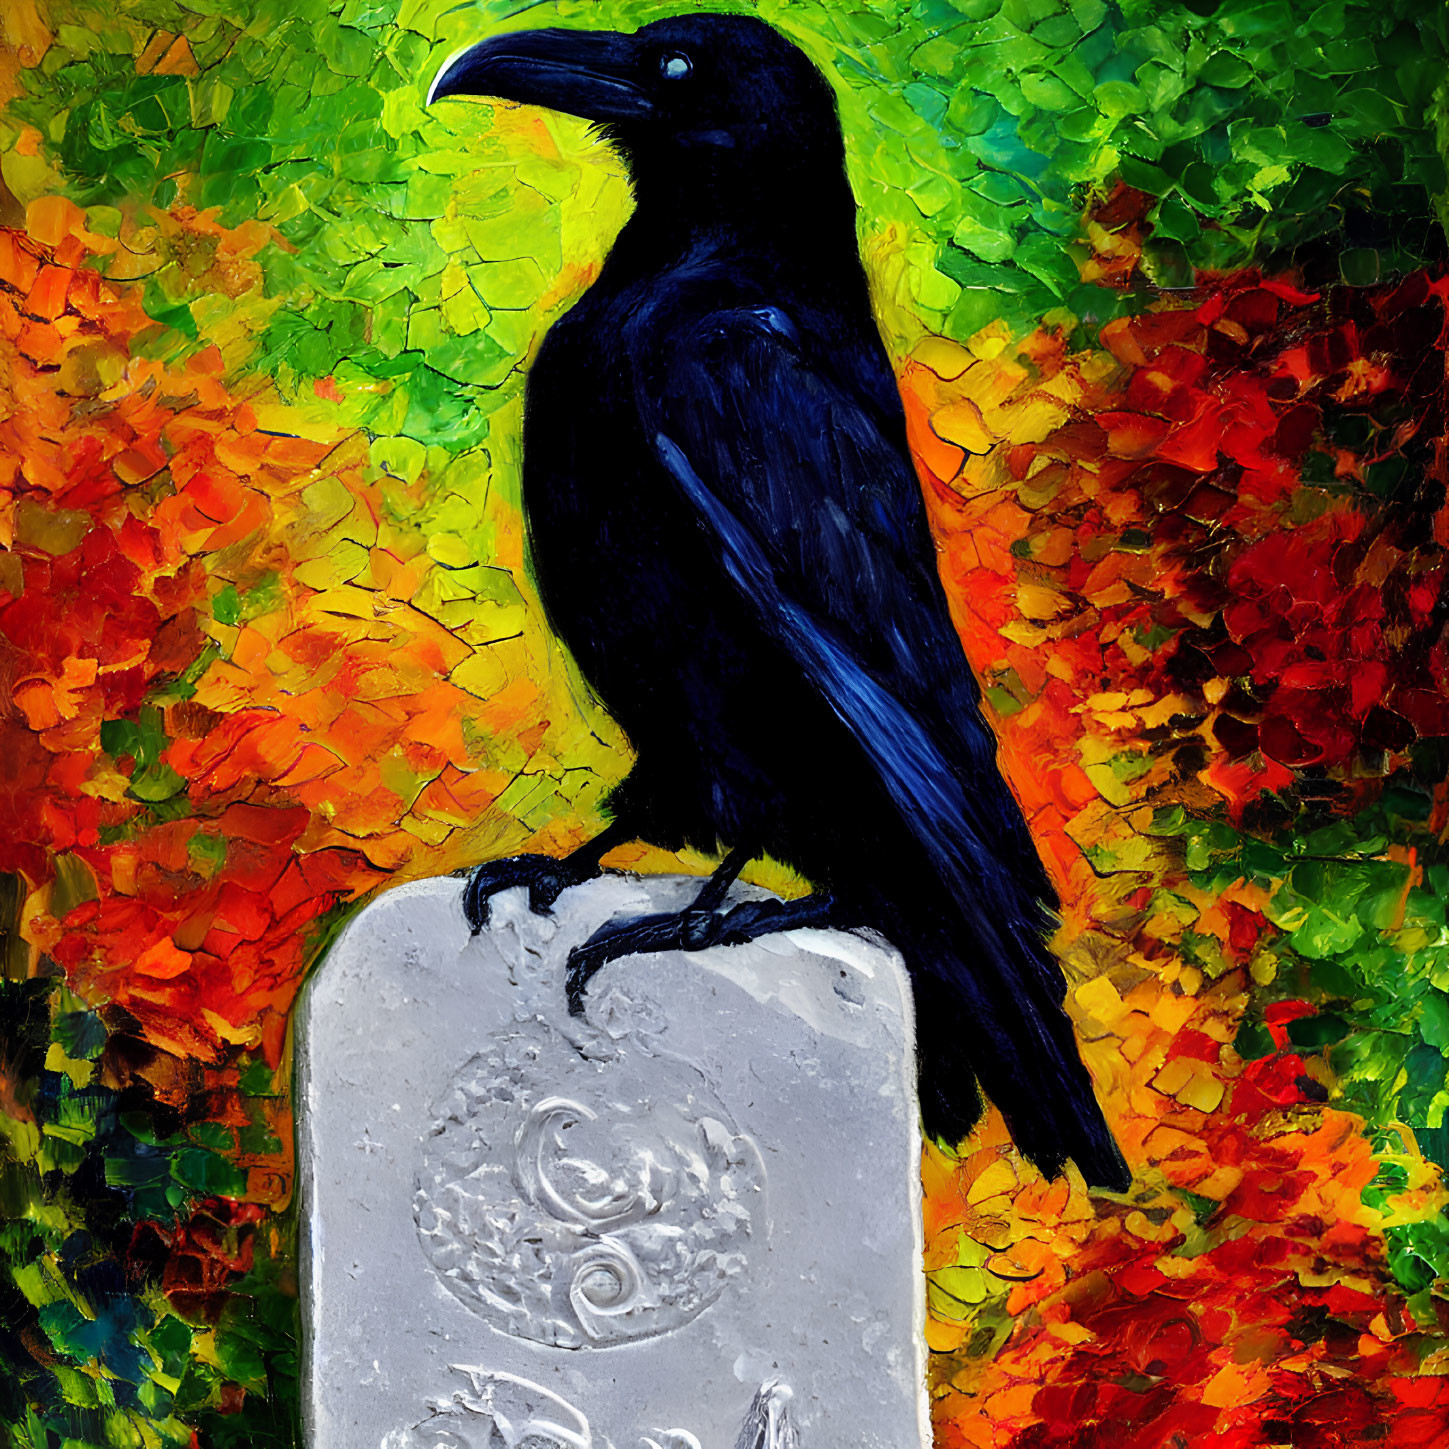 Vibrant raven painting on textured stone with colorful mosaic background